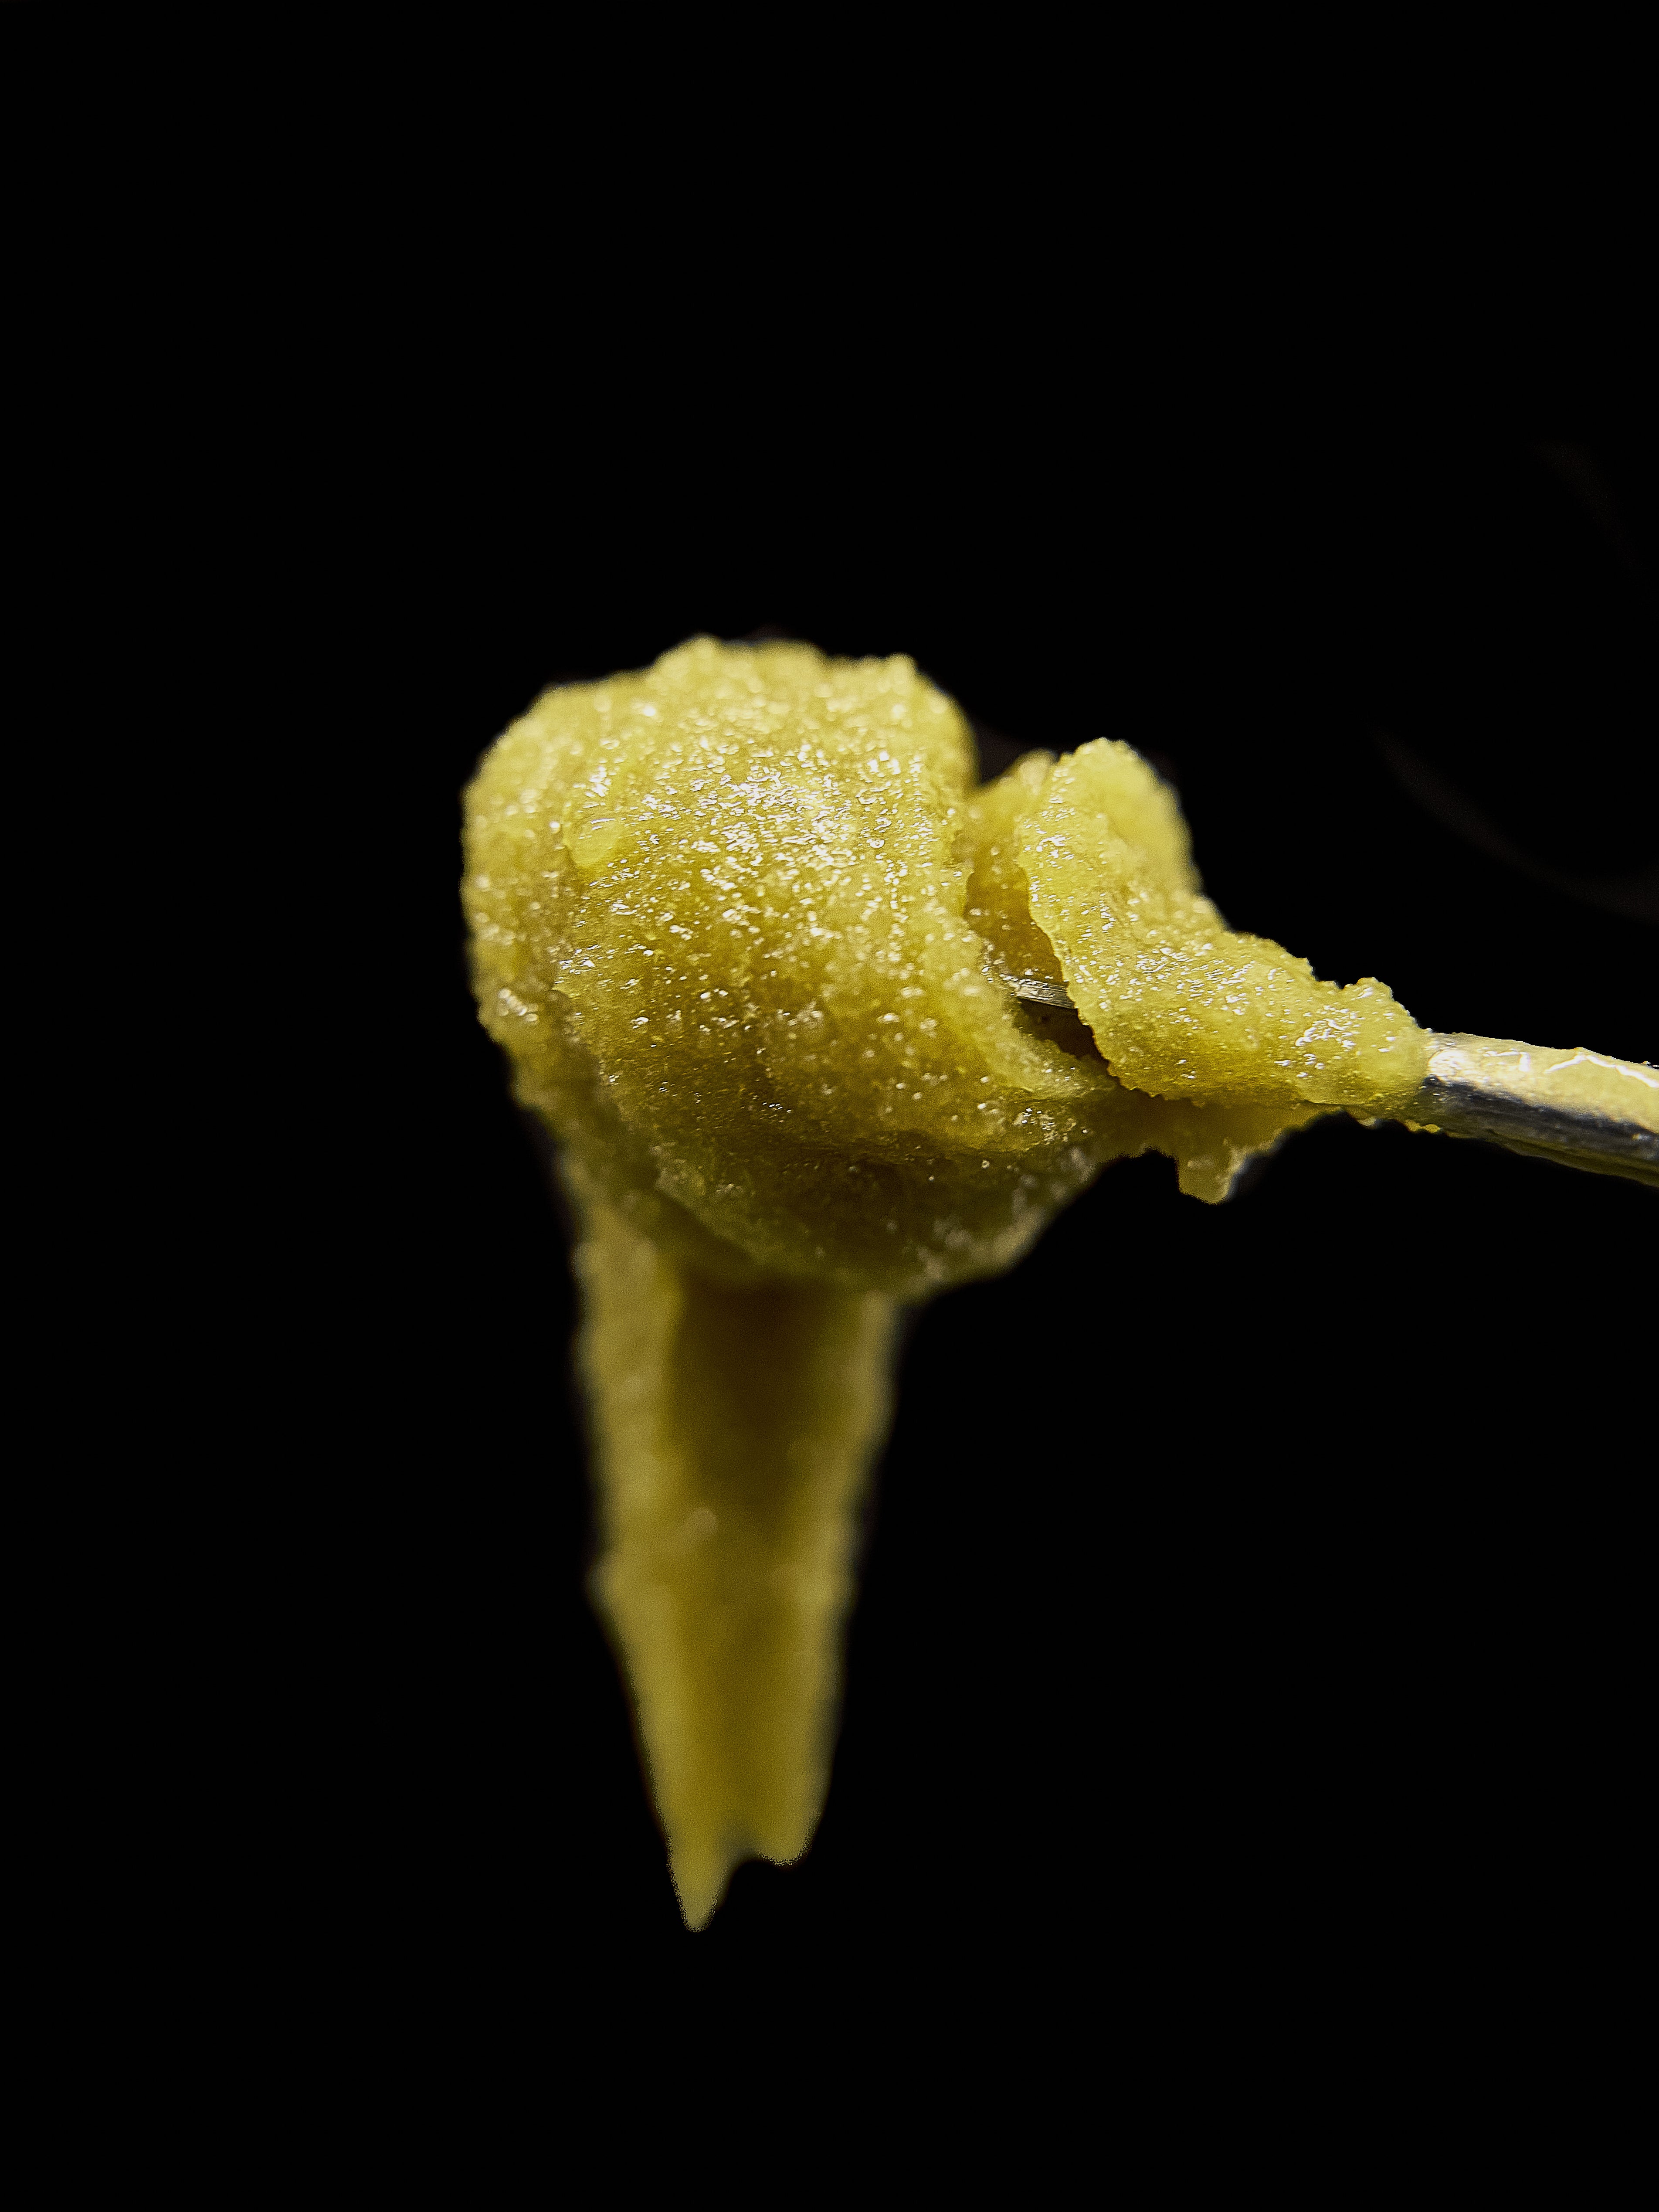 A golden-hued scoop of live rosin cannabis extract is held up with a metal tool against a black background.